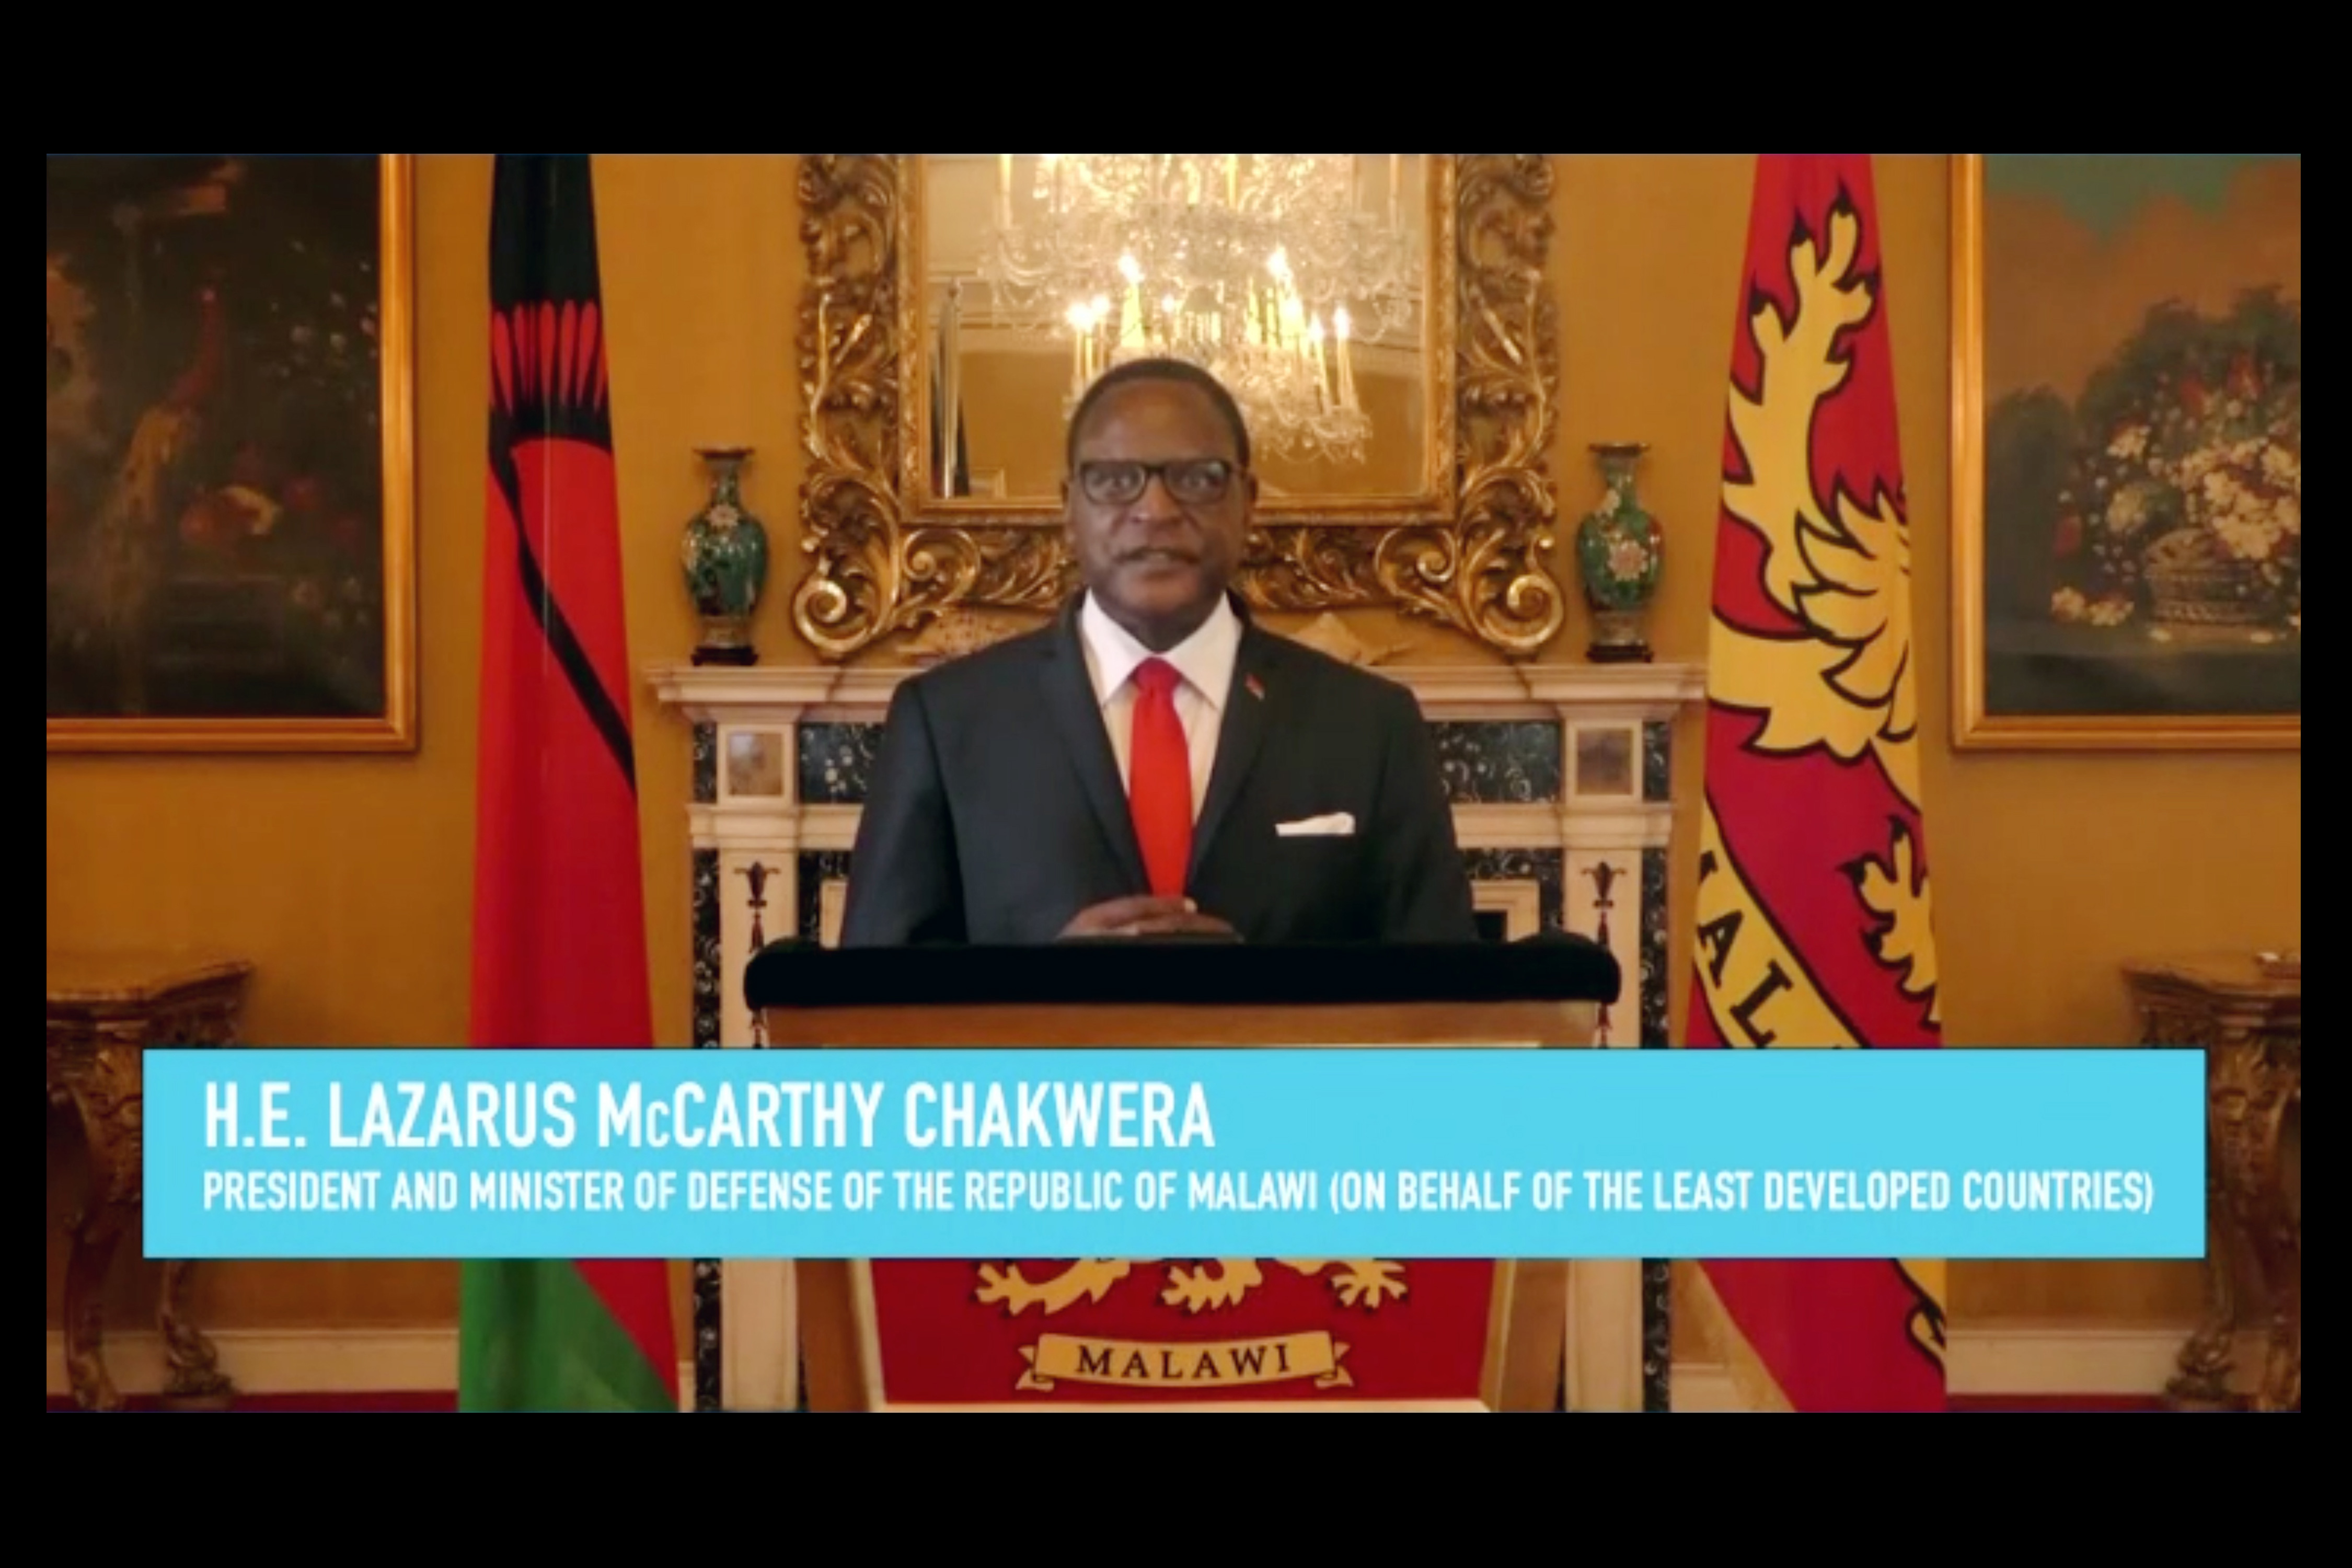 Lazarus Chakwera, President of Malawi, for the Least Developed Countries (LDCs)